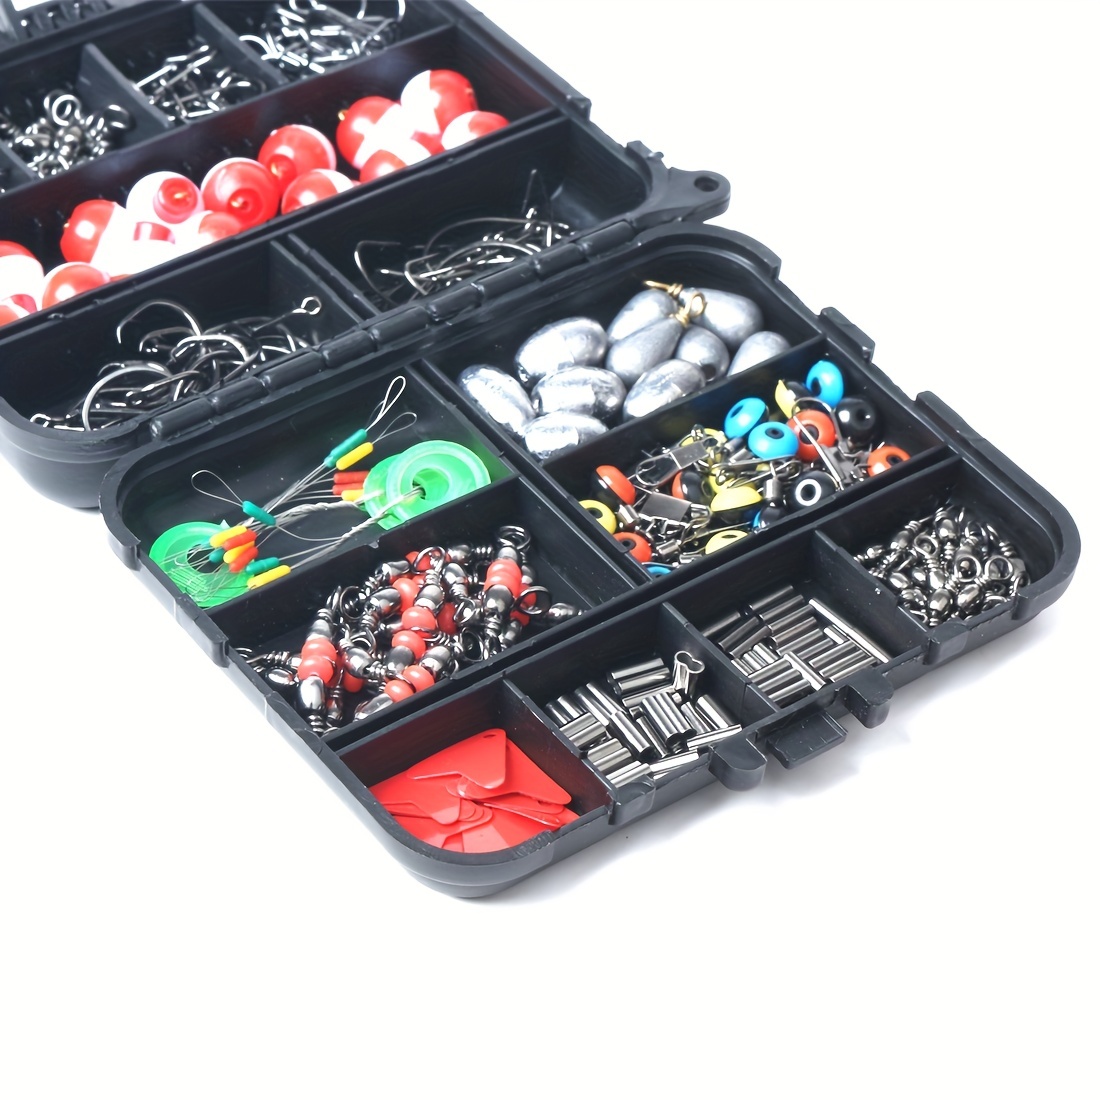 GoolRC Fishing Accessories Kit - 343pcs Tackle Box with Hooks, Weights, Jig  Heads, Barrel Swivels - Complete Fishing Set 